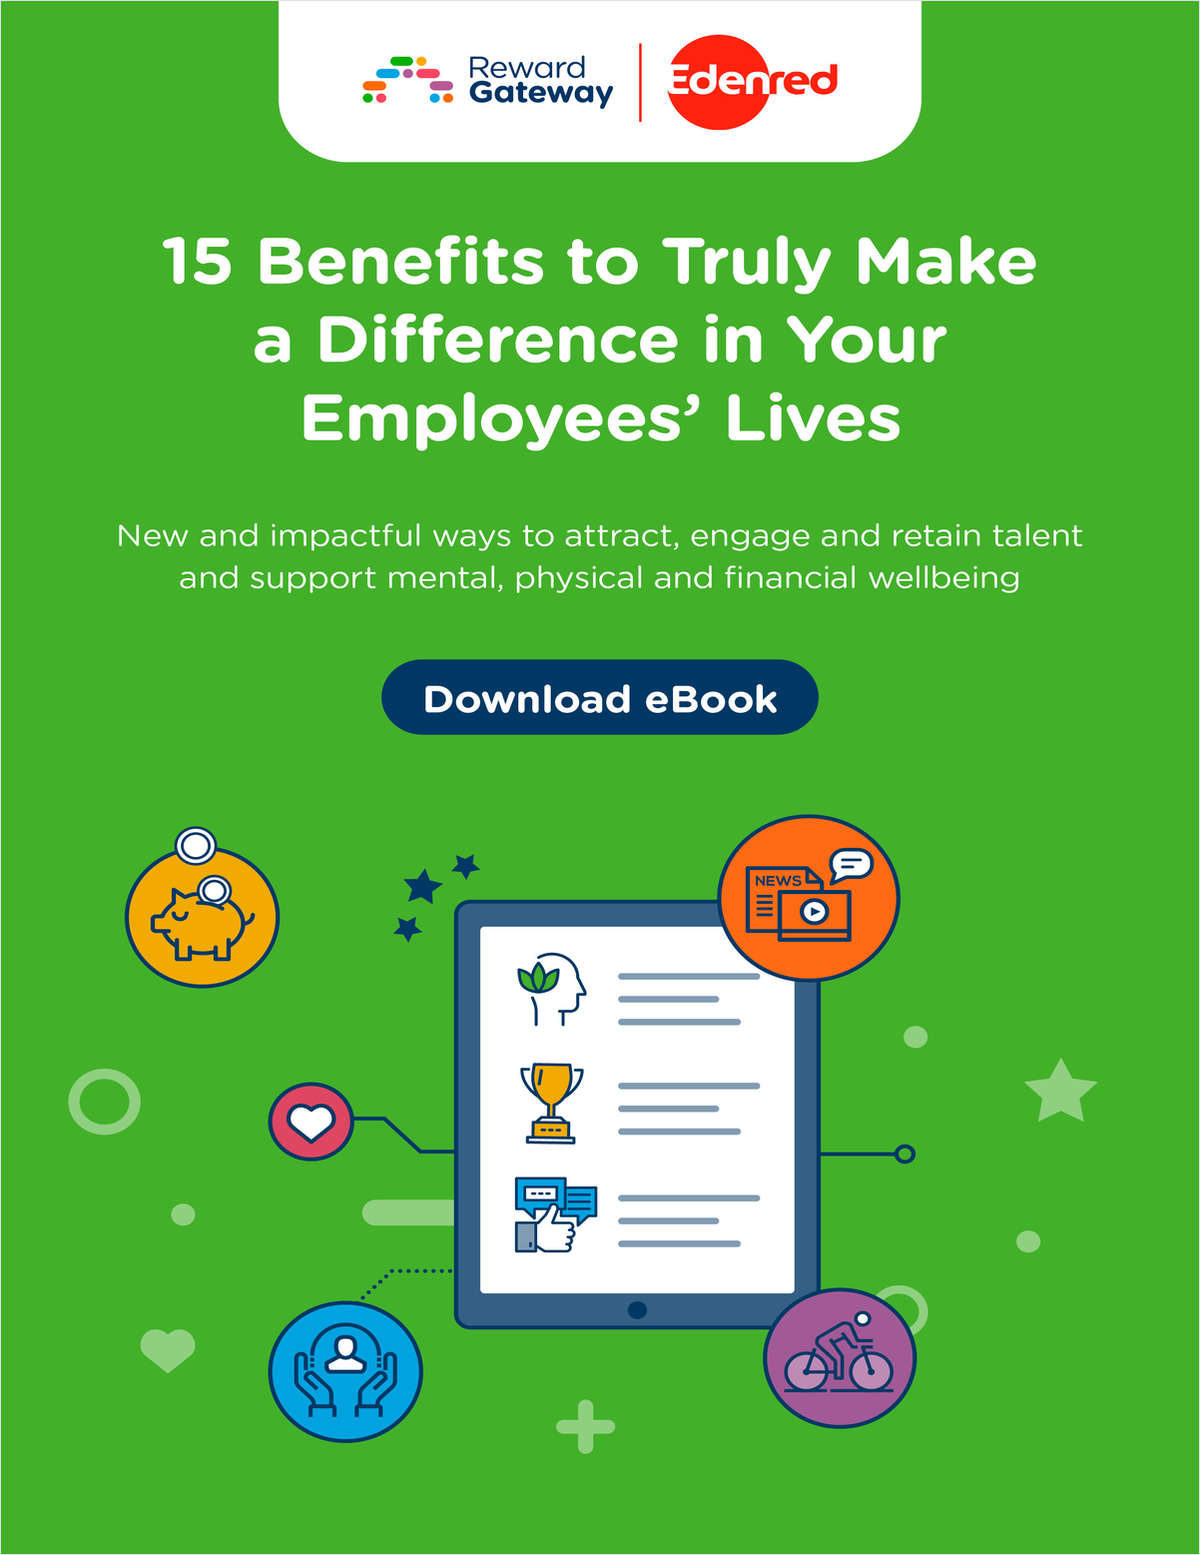 15 Benefits to Make a Difference in Your Employees' Lives